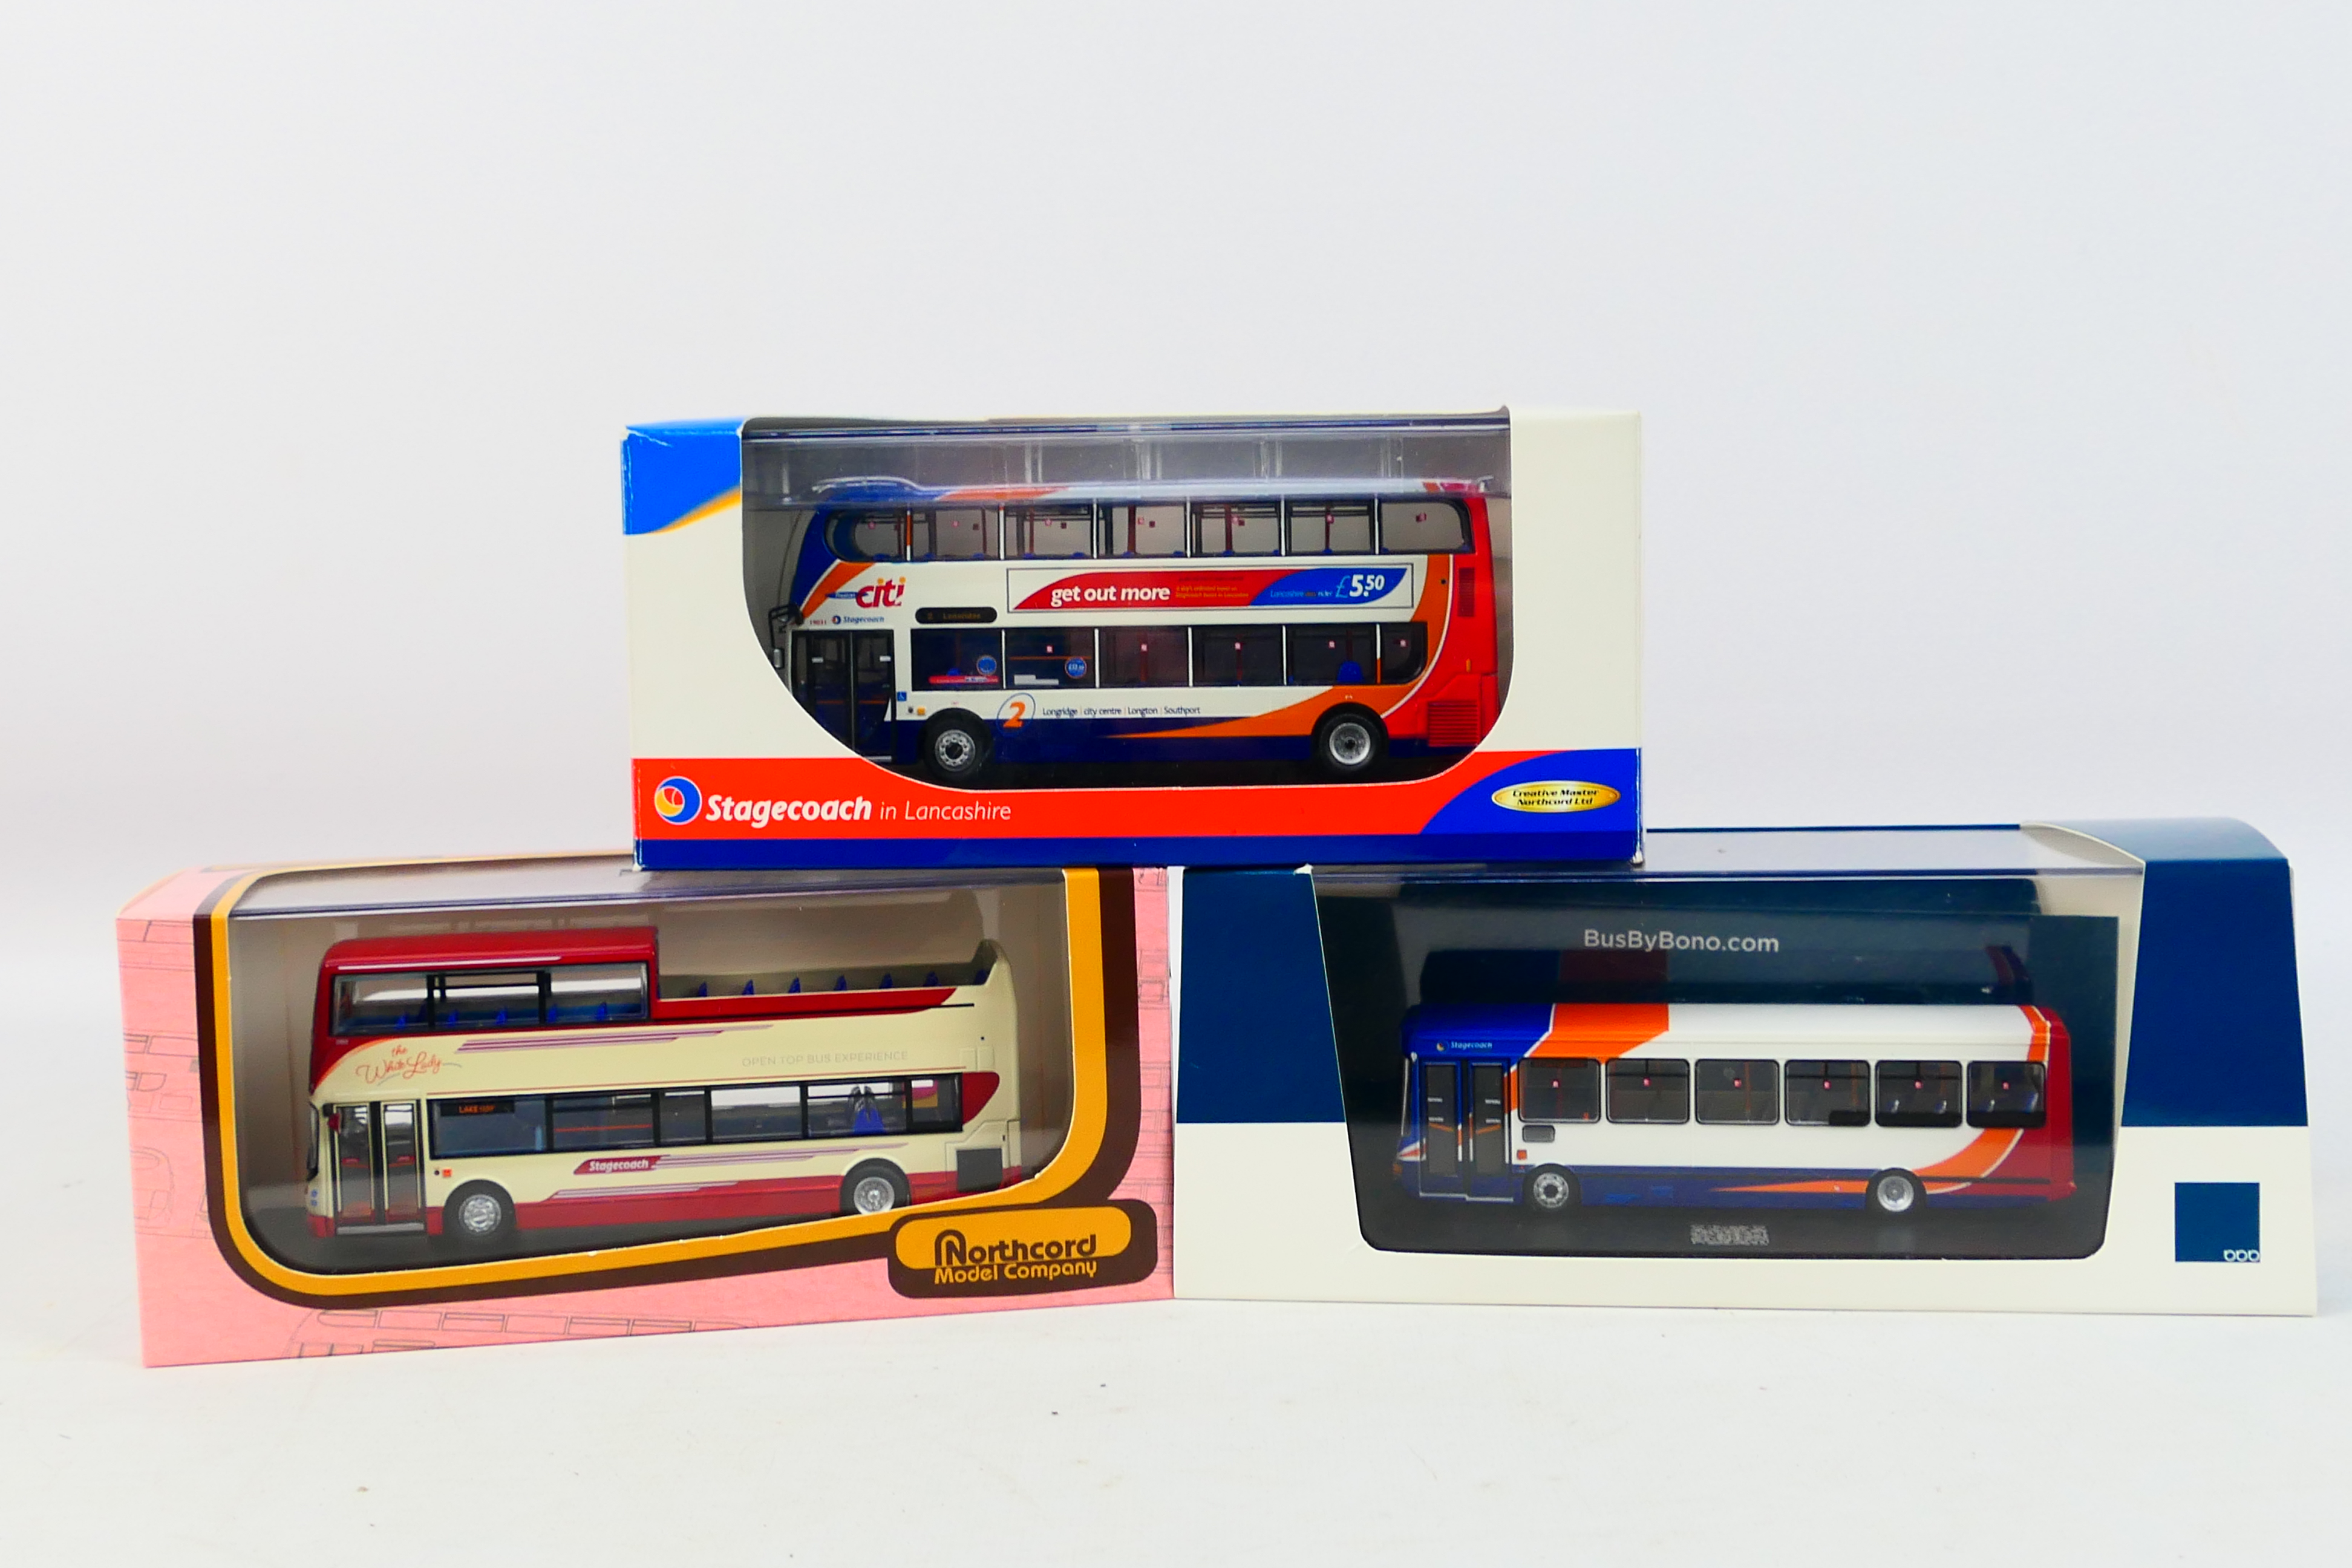 Creative Master - Northcord - Bus By Bono - 3 x models in 1:76 scale,